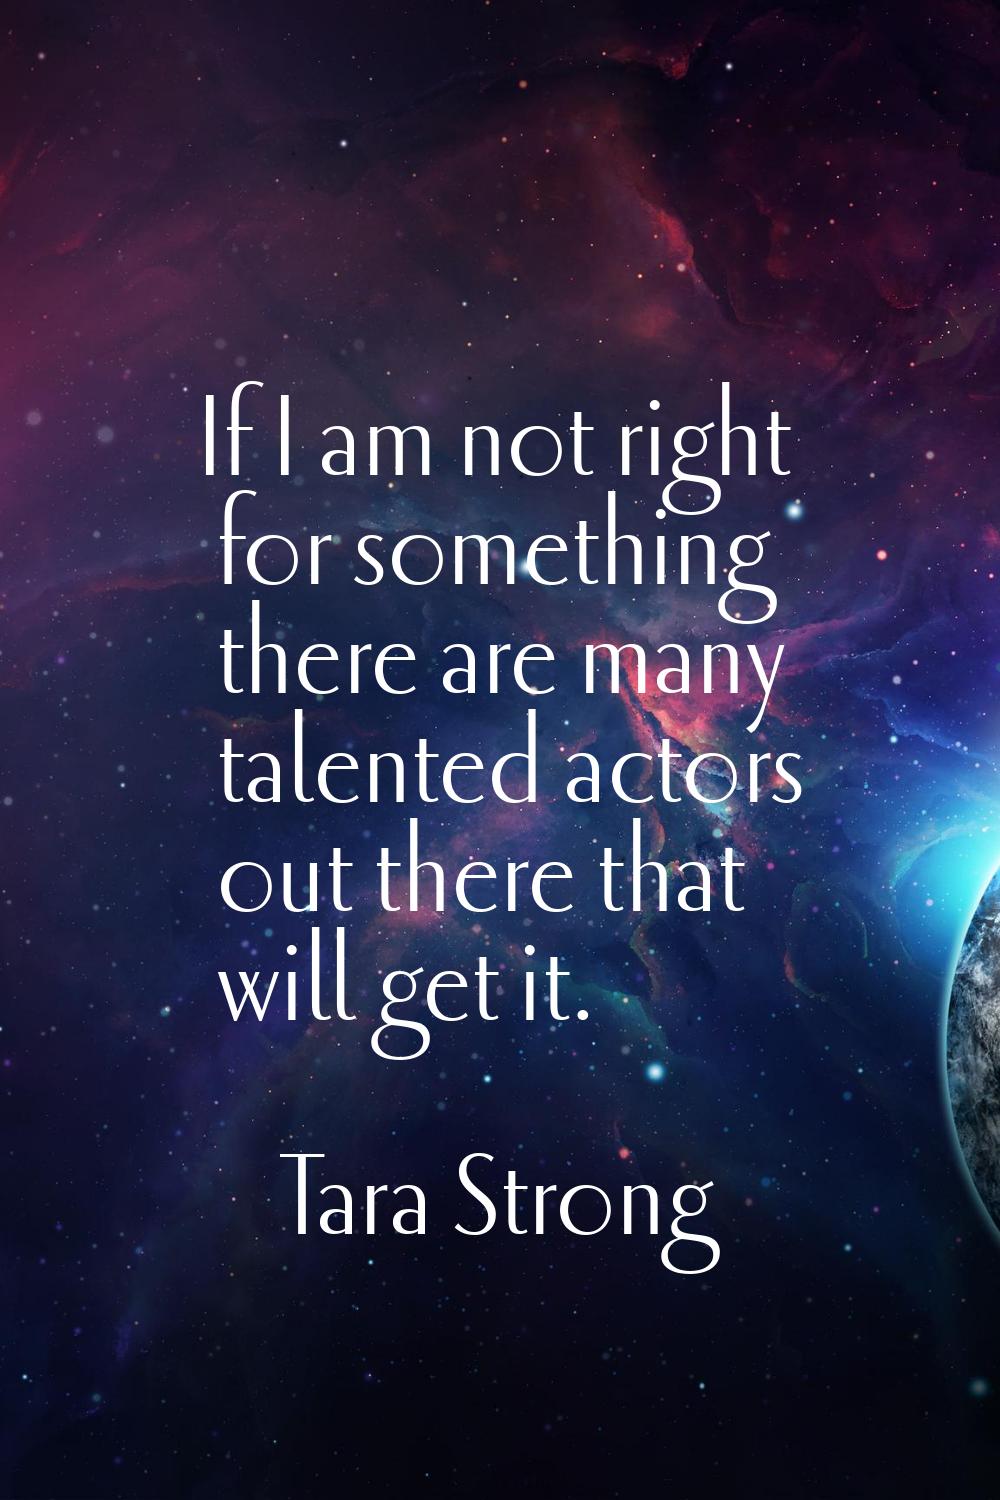 If I am not right for something there are many talented actors out there that will get it.